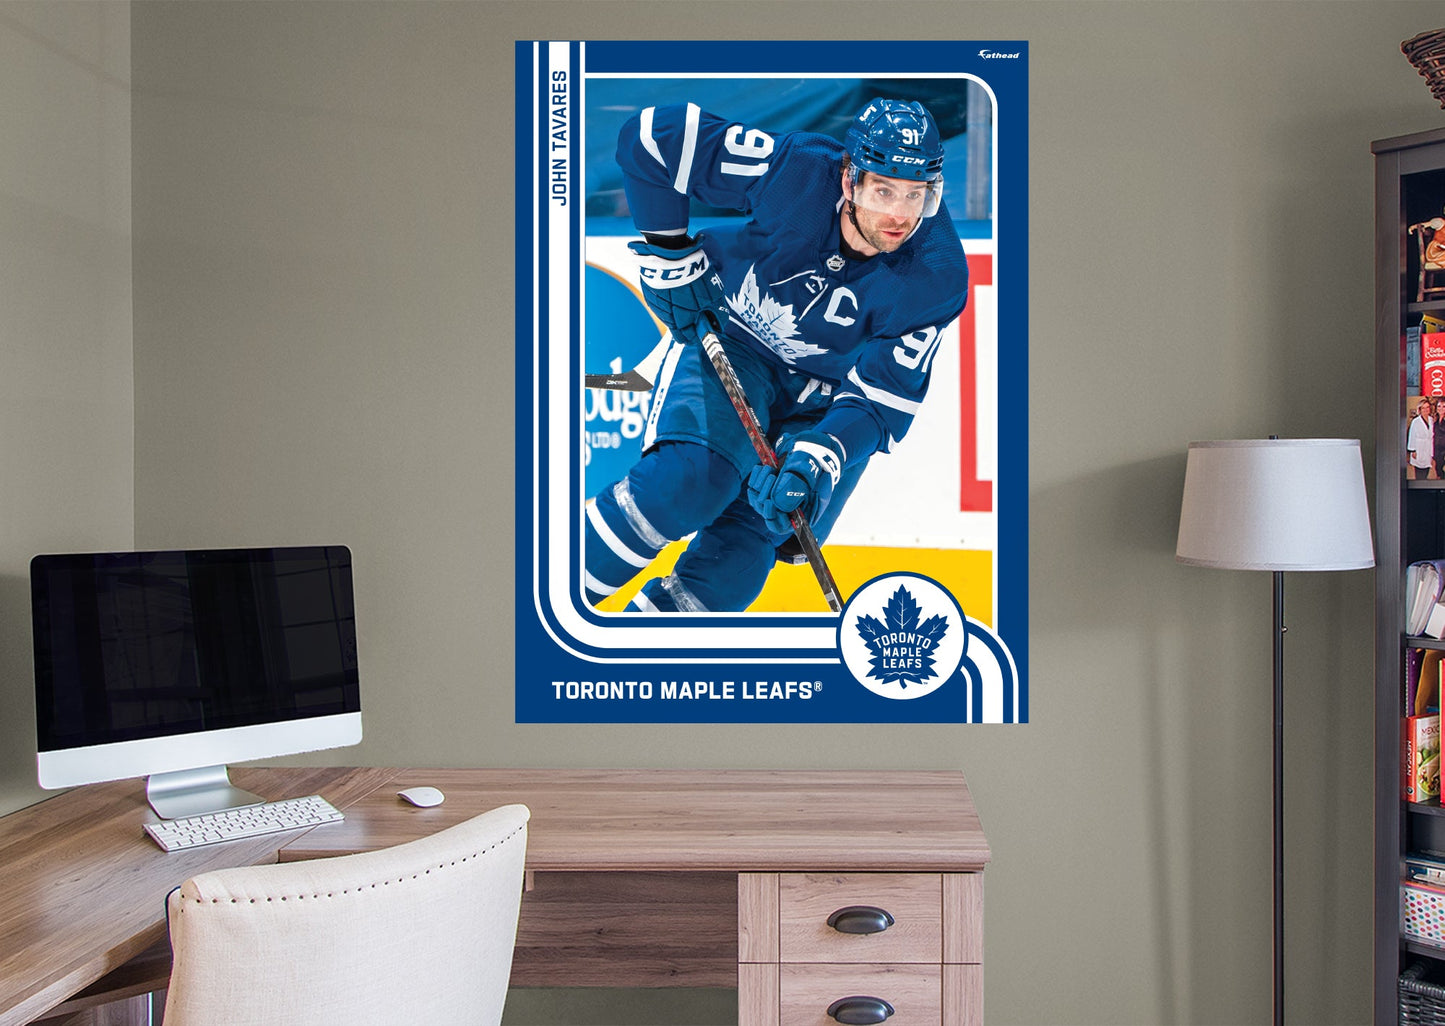 Toronto Maple Leafs: John Tavares Poster - Officially Licensed NHL Removable Adhesive Decal